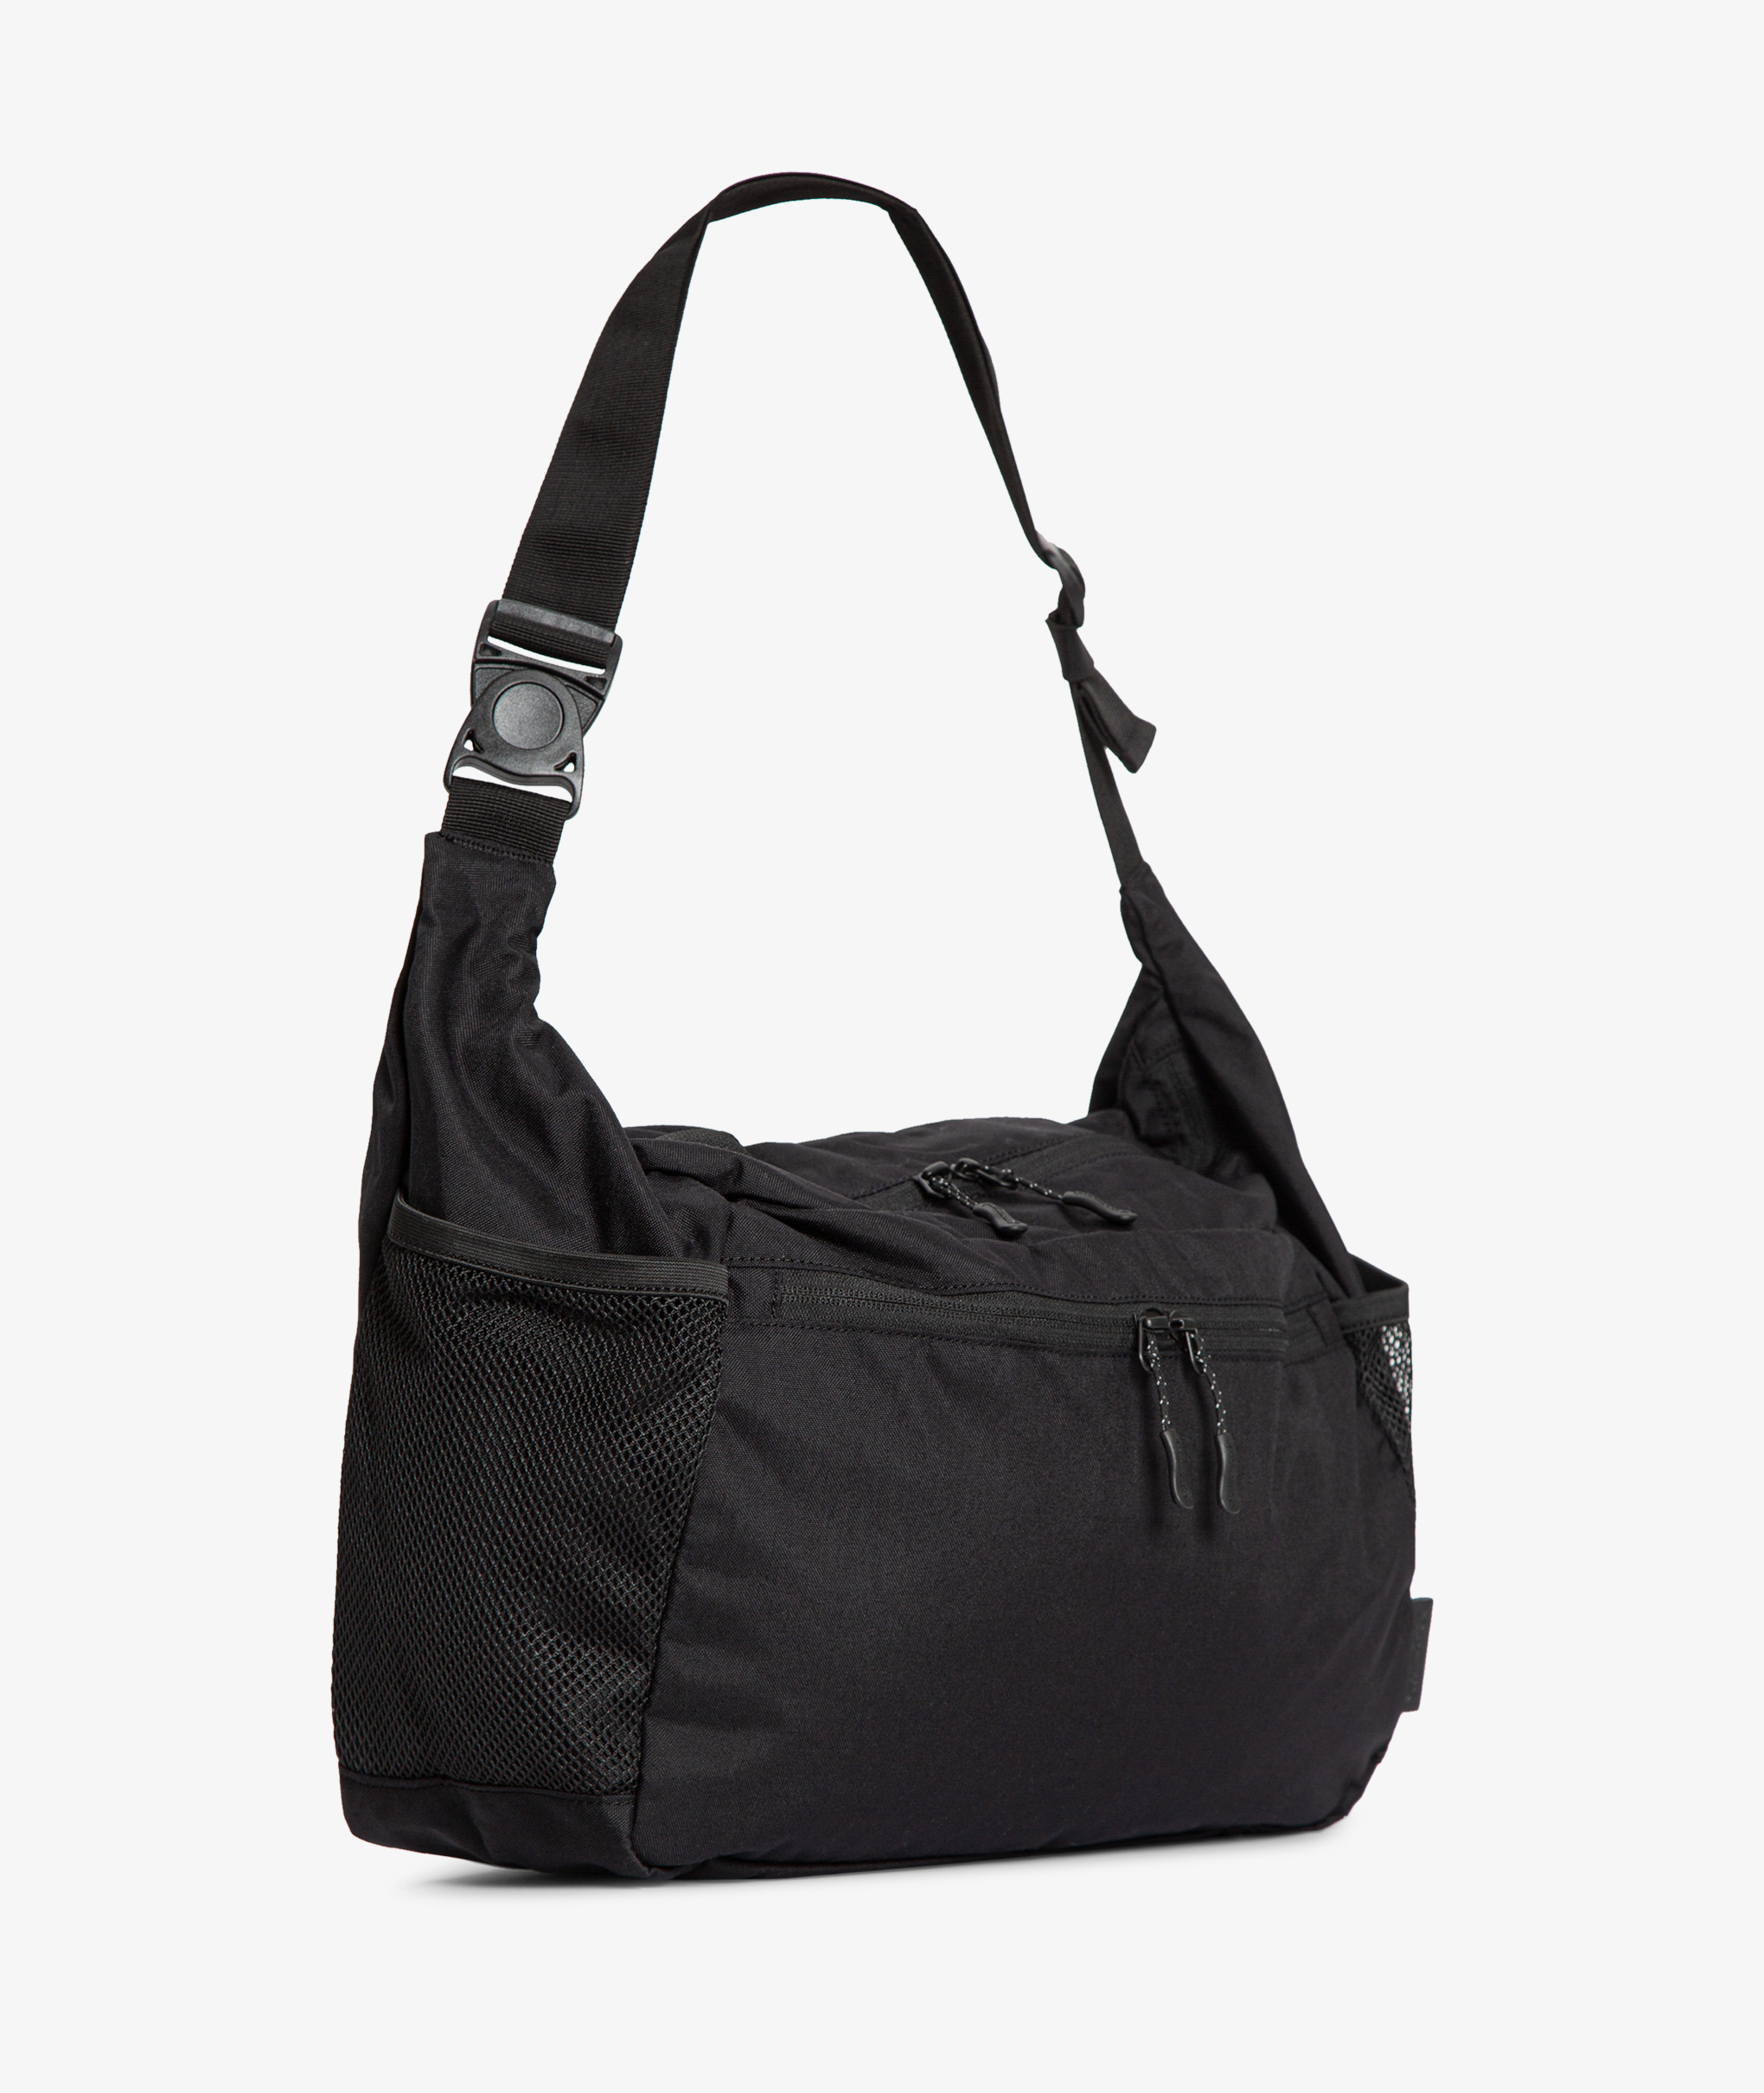 Norse Store | Shipping Worldwide - Snow Peak Everyday Use Shoulder Bag ...